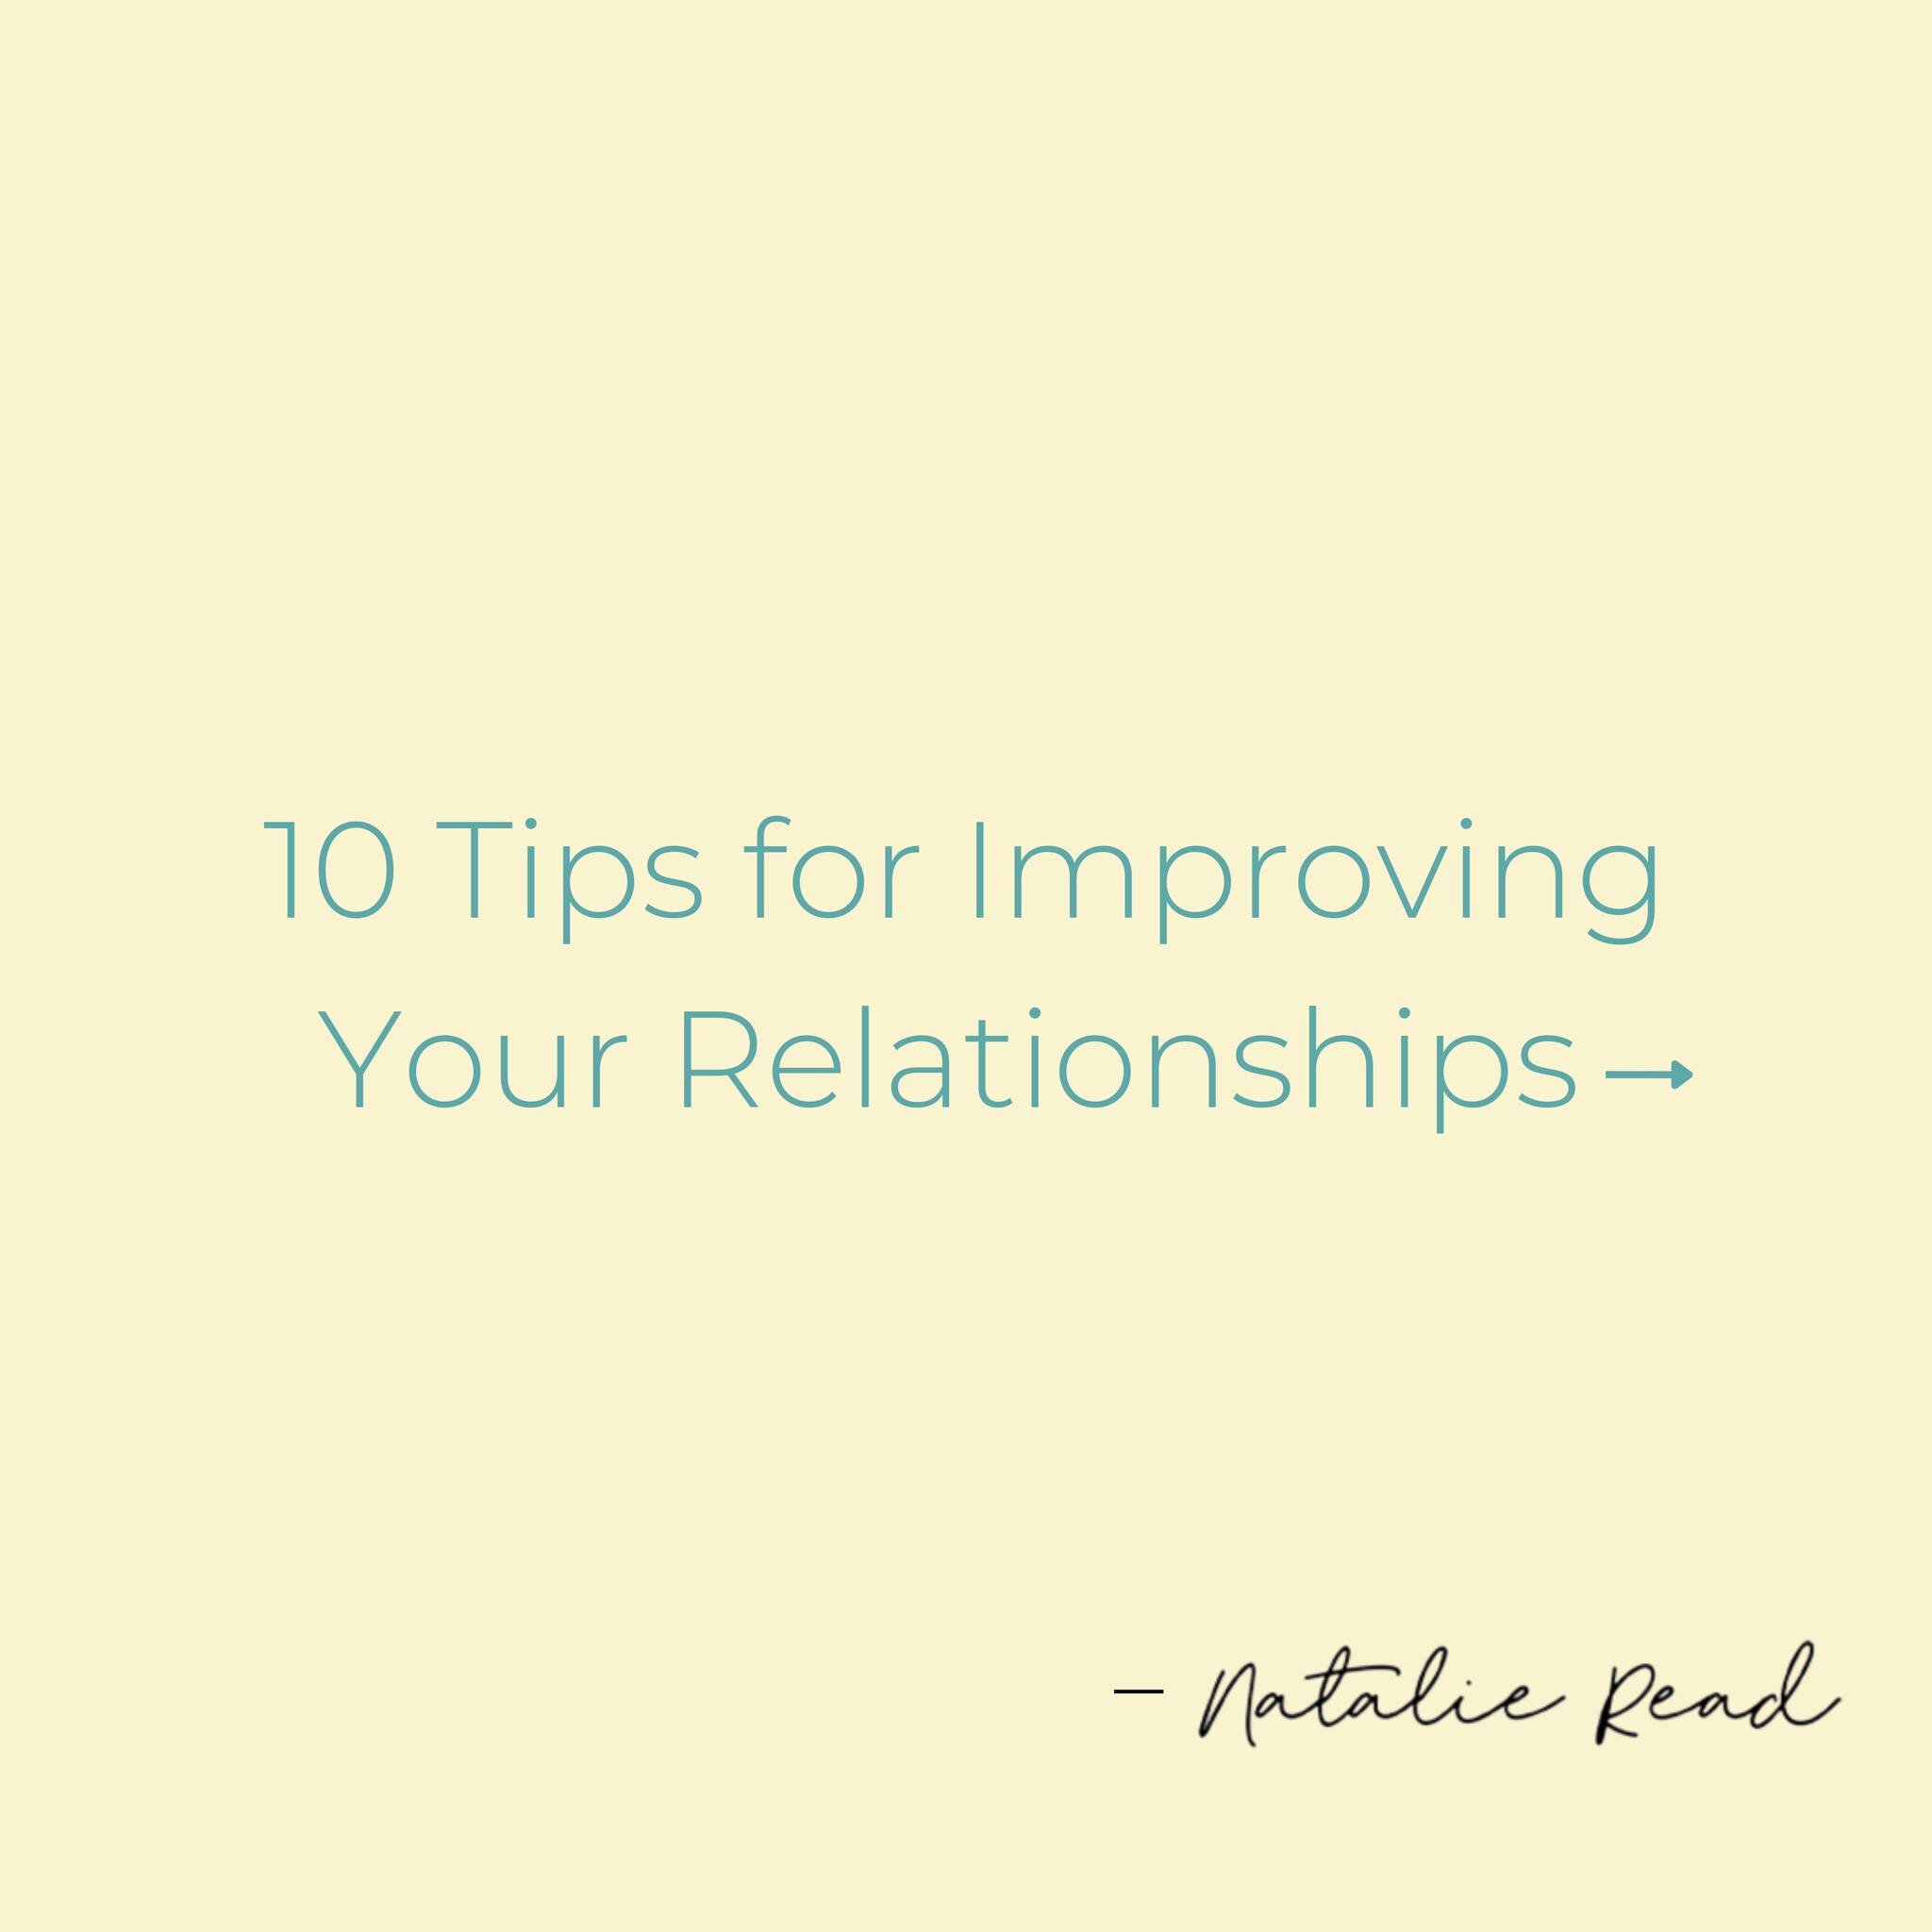 10 Tips for Improving Your Relationships 🌟

Whether you&rsquo;re wanting to bring more joy or peace to your relationship with friends, family, a significant other or yourself, these pointers will help you to maintain healthier relationships. 🍃

Swi